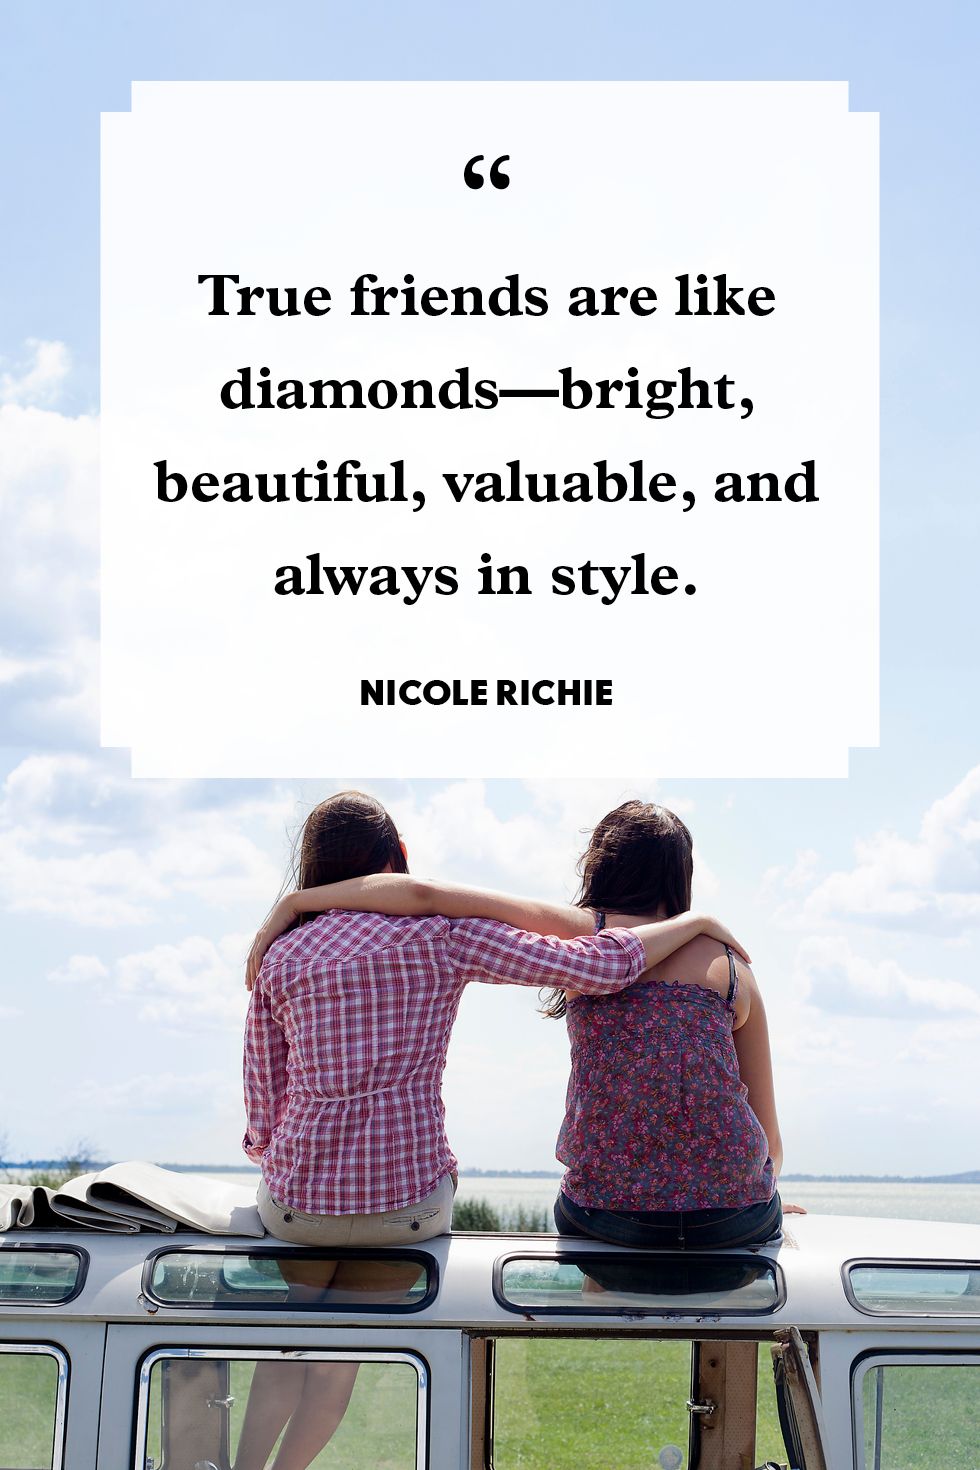 An Incredible Collection of Friendship Quotes Images – Top 999+ Images in Full 4K